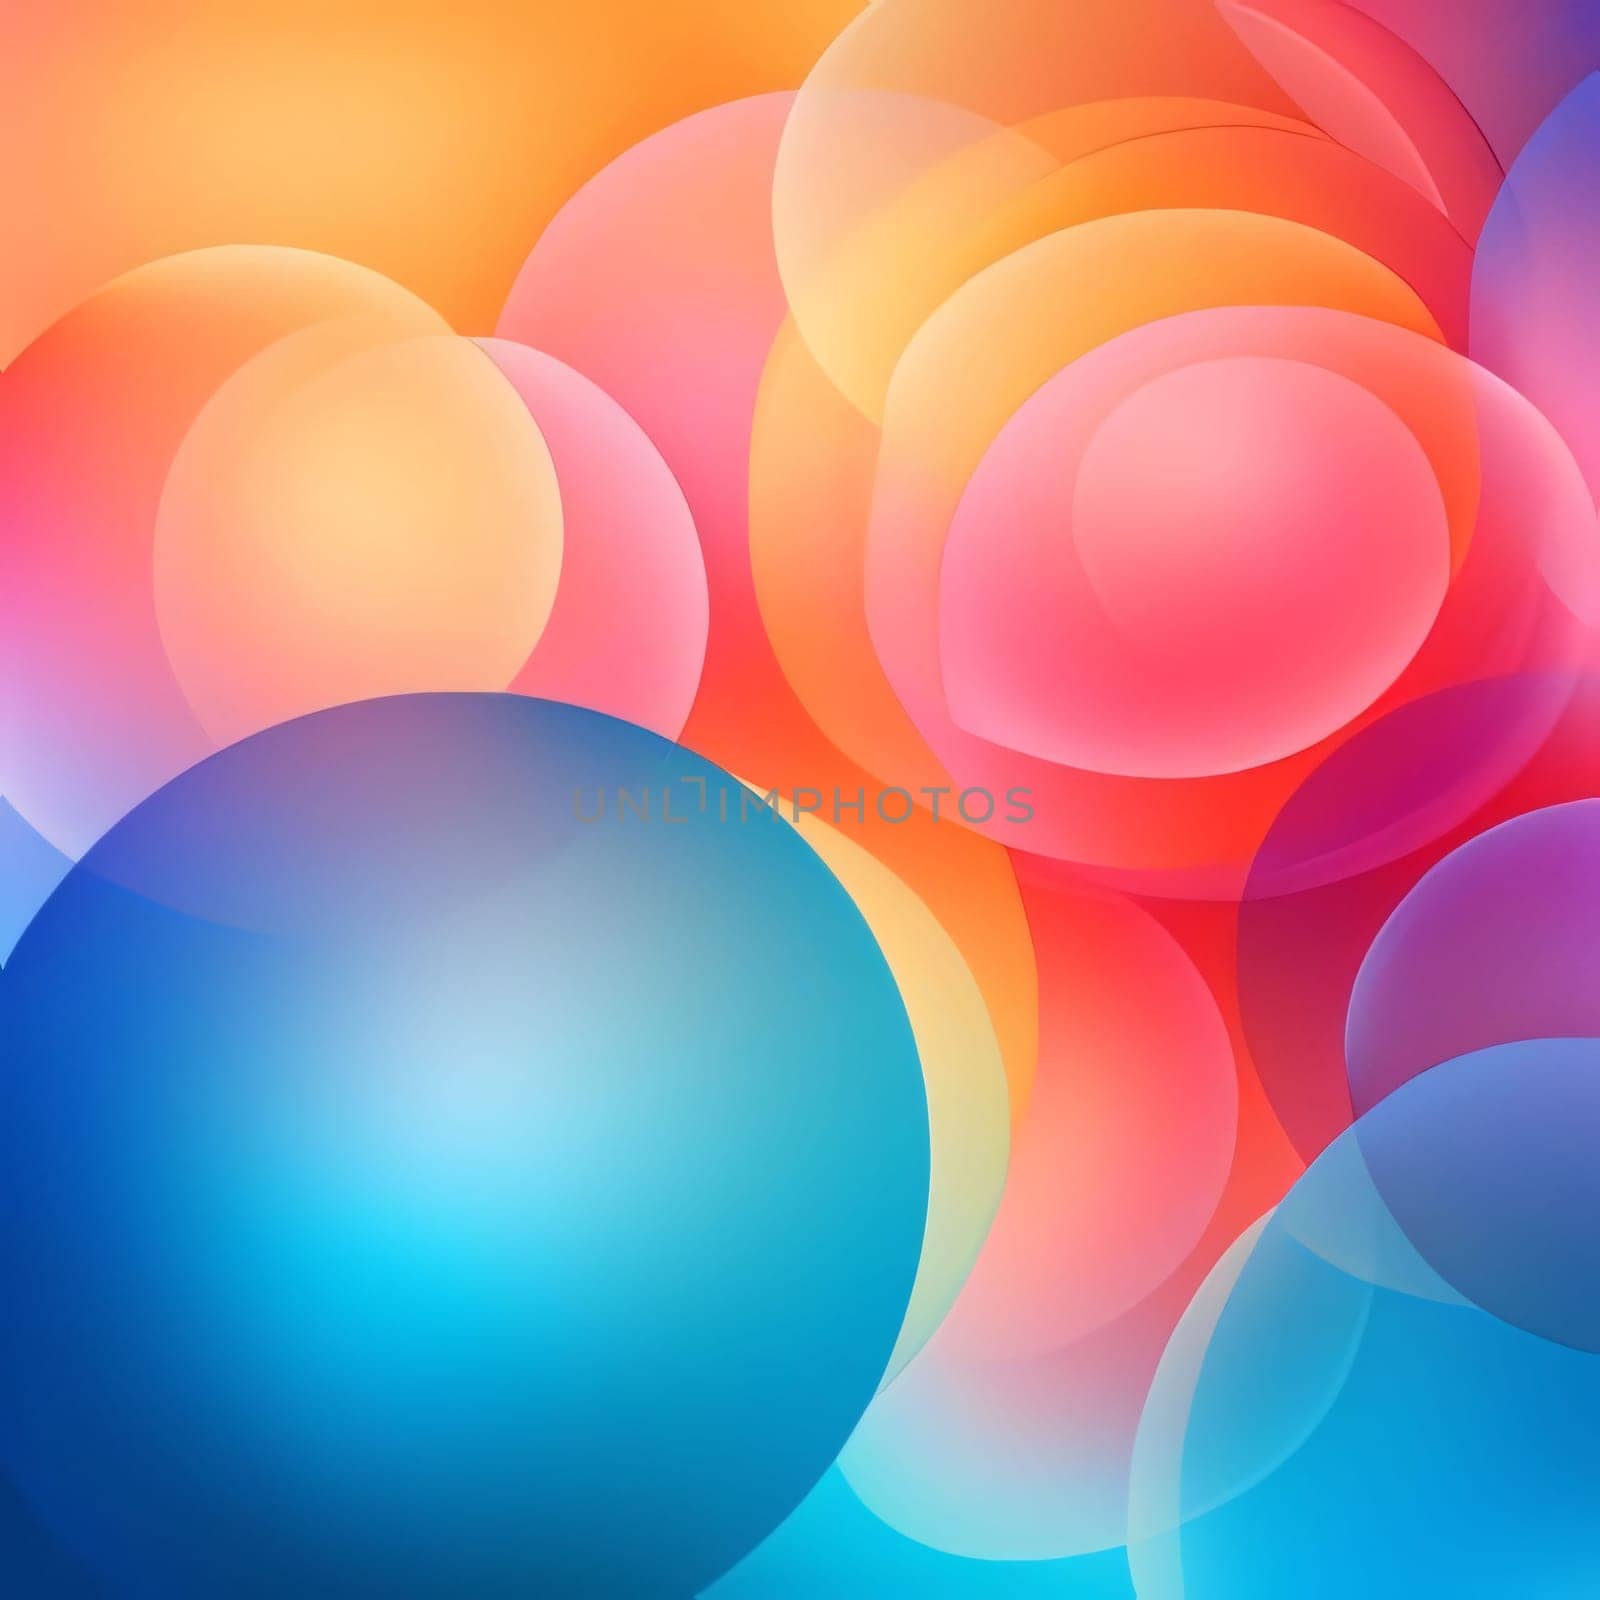 Abstract background design: Abstract background with multicolored circles. Vector illustration. Eps 10